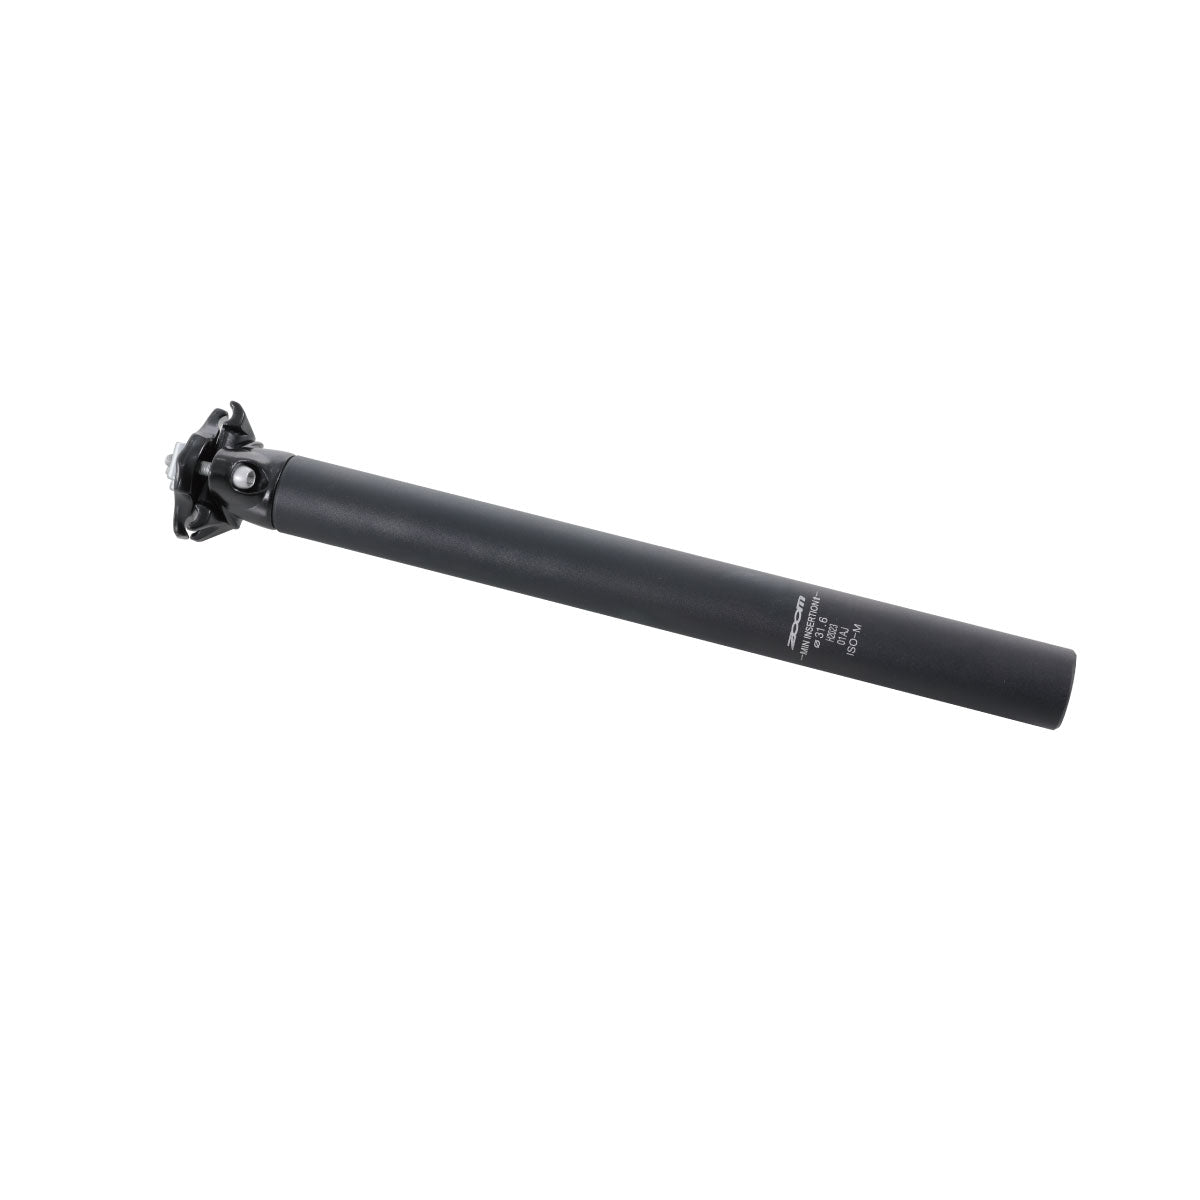 Photograph of a Zoom seatpost for Denago eXC1 eBike